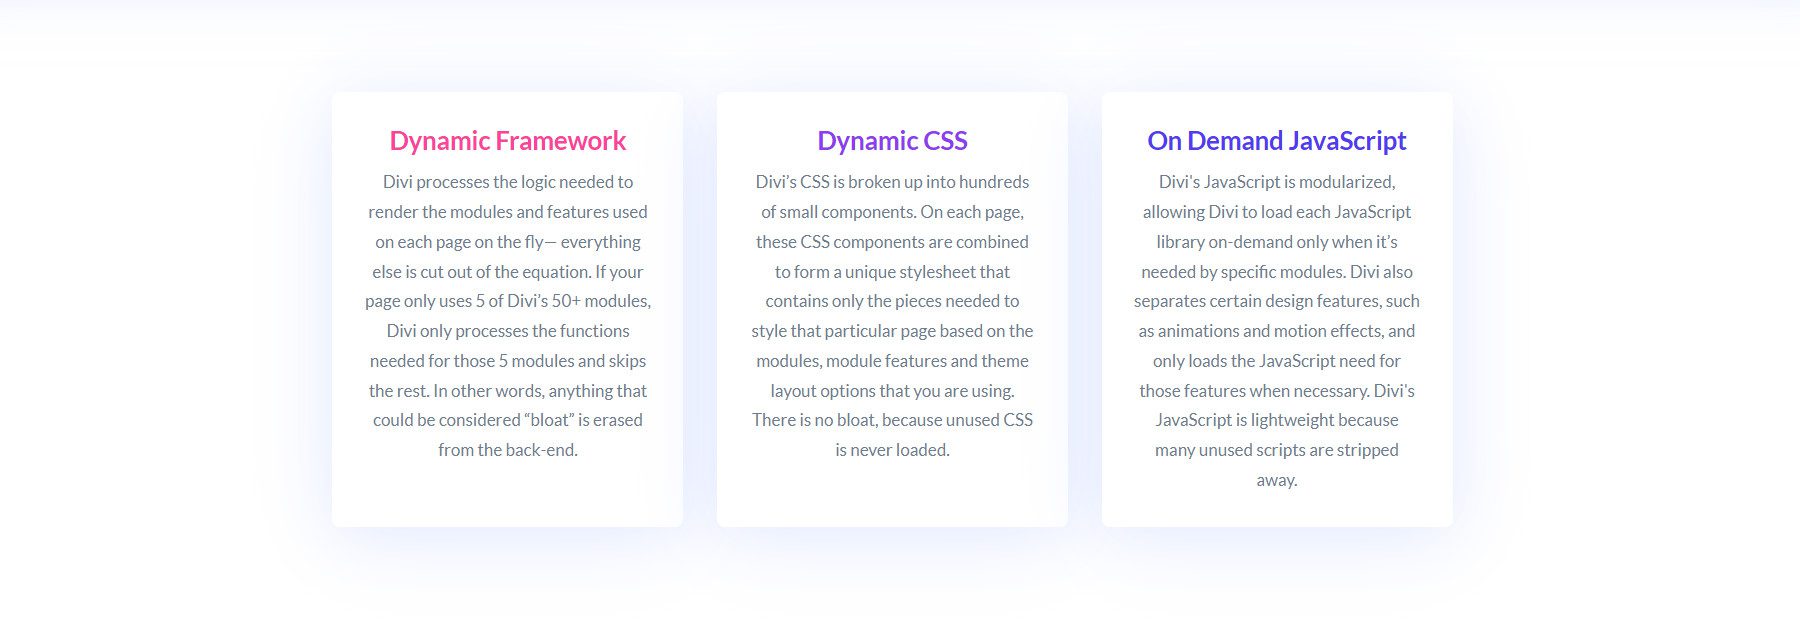 Divi Speed and Performance Built In